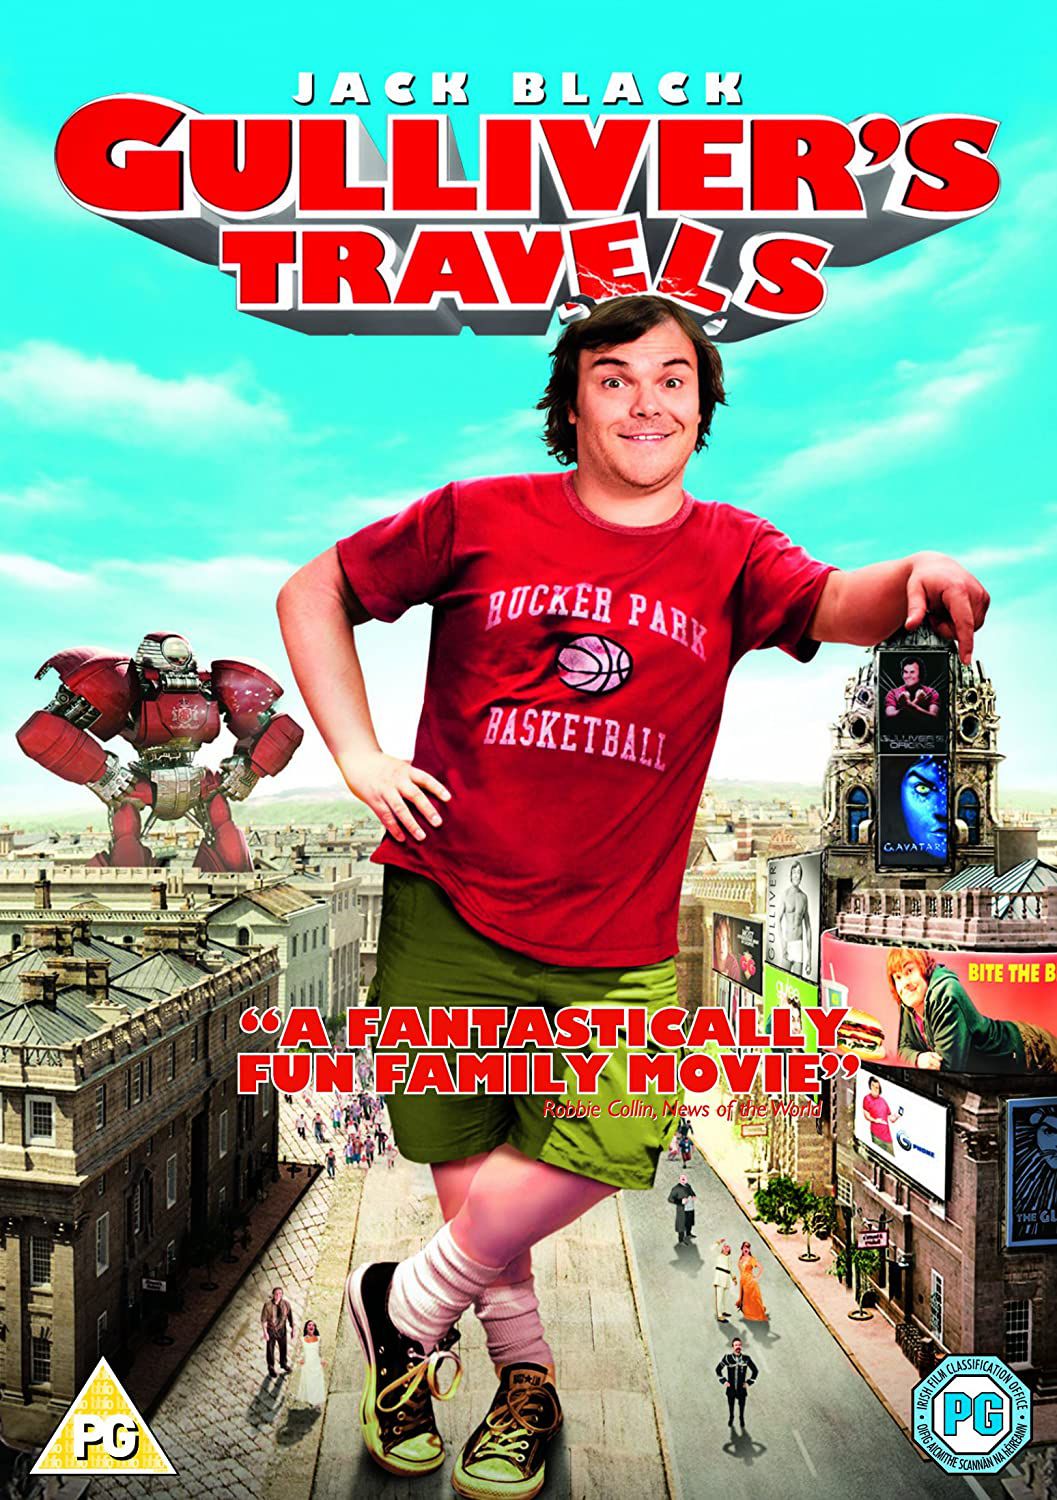 <p><b>Film Adaptation: “Gulliver’s Travels” (2010)</b></p><p><b>Critic Quote:</b> “The film feels rushed and slight at every point.” — The Hollywood Reporter</p><p>Johnathon Swift’s 1726 novel “Gulliver’s Travels” is a beloved classic for adults and children alike, but the big screen adaptation is cheesy and lacks the whimsy and charm that the novel exudes. Critics everywhere agreed that the film had a lazy, lackluster script and star Jack Black did little to salvage it.</p>